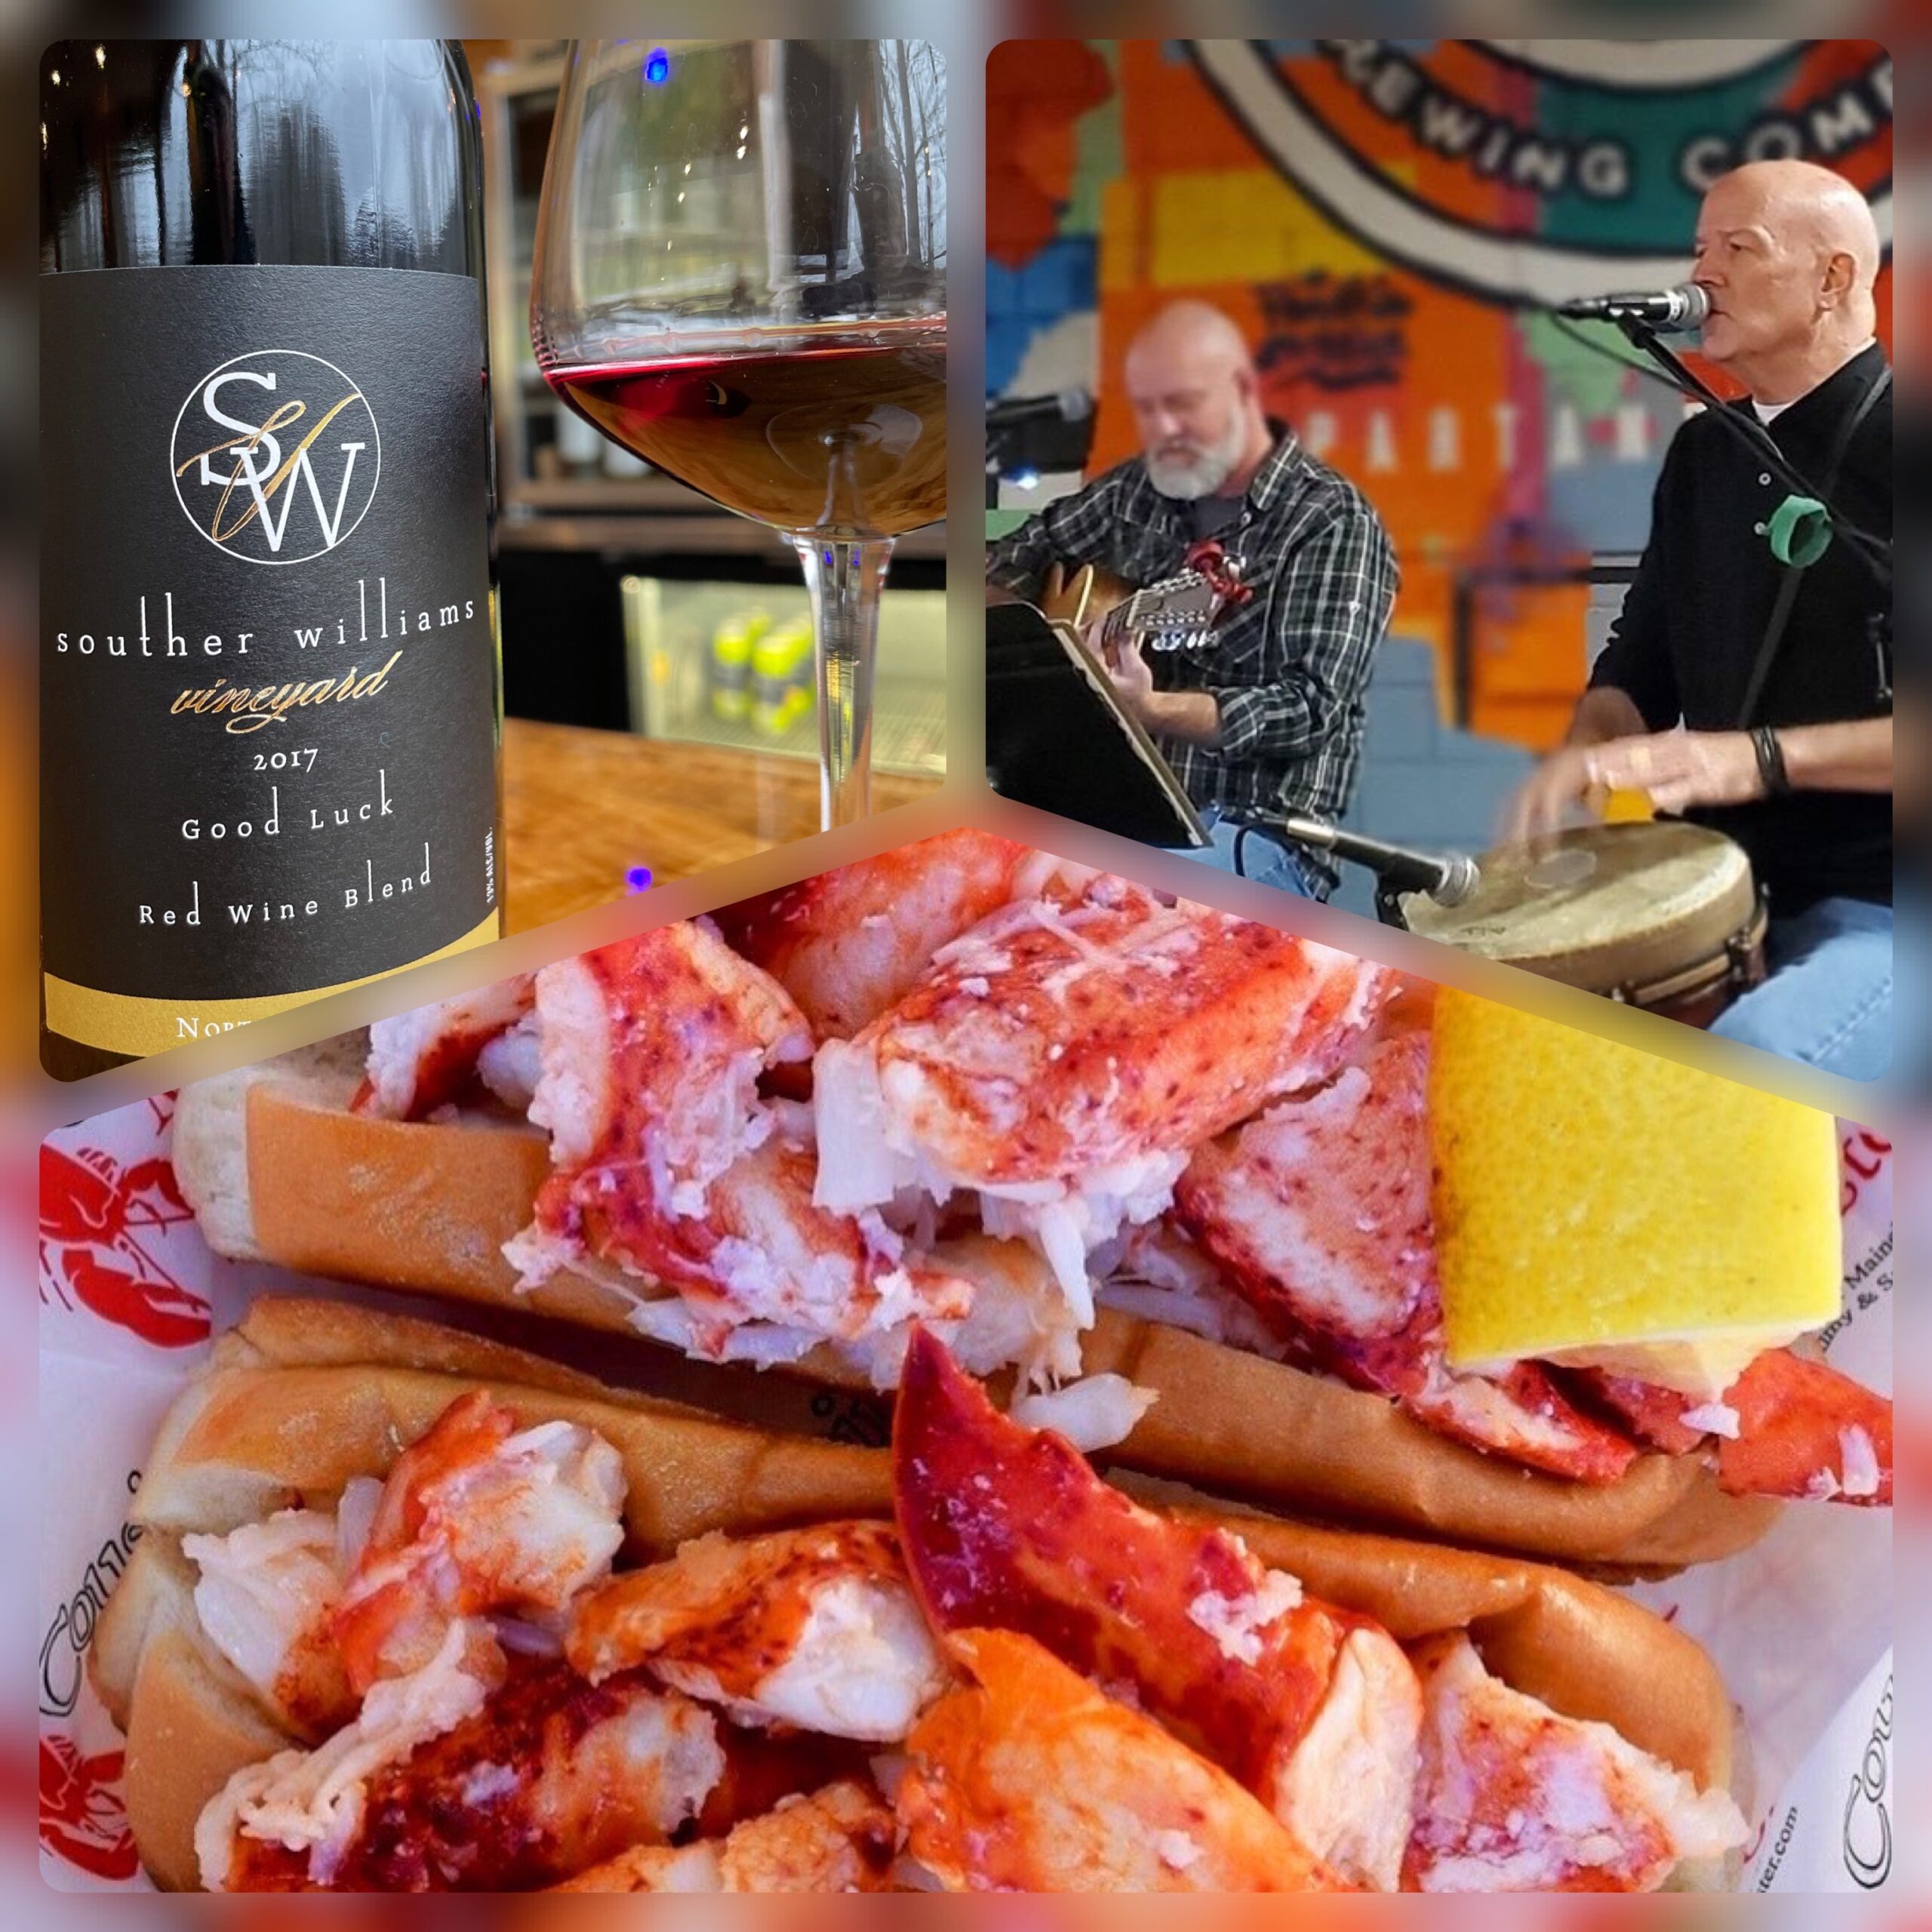 Cousins Maine Lobster, Bill and Tad's Excellent Duo, Souther Williams Vineyard